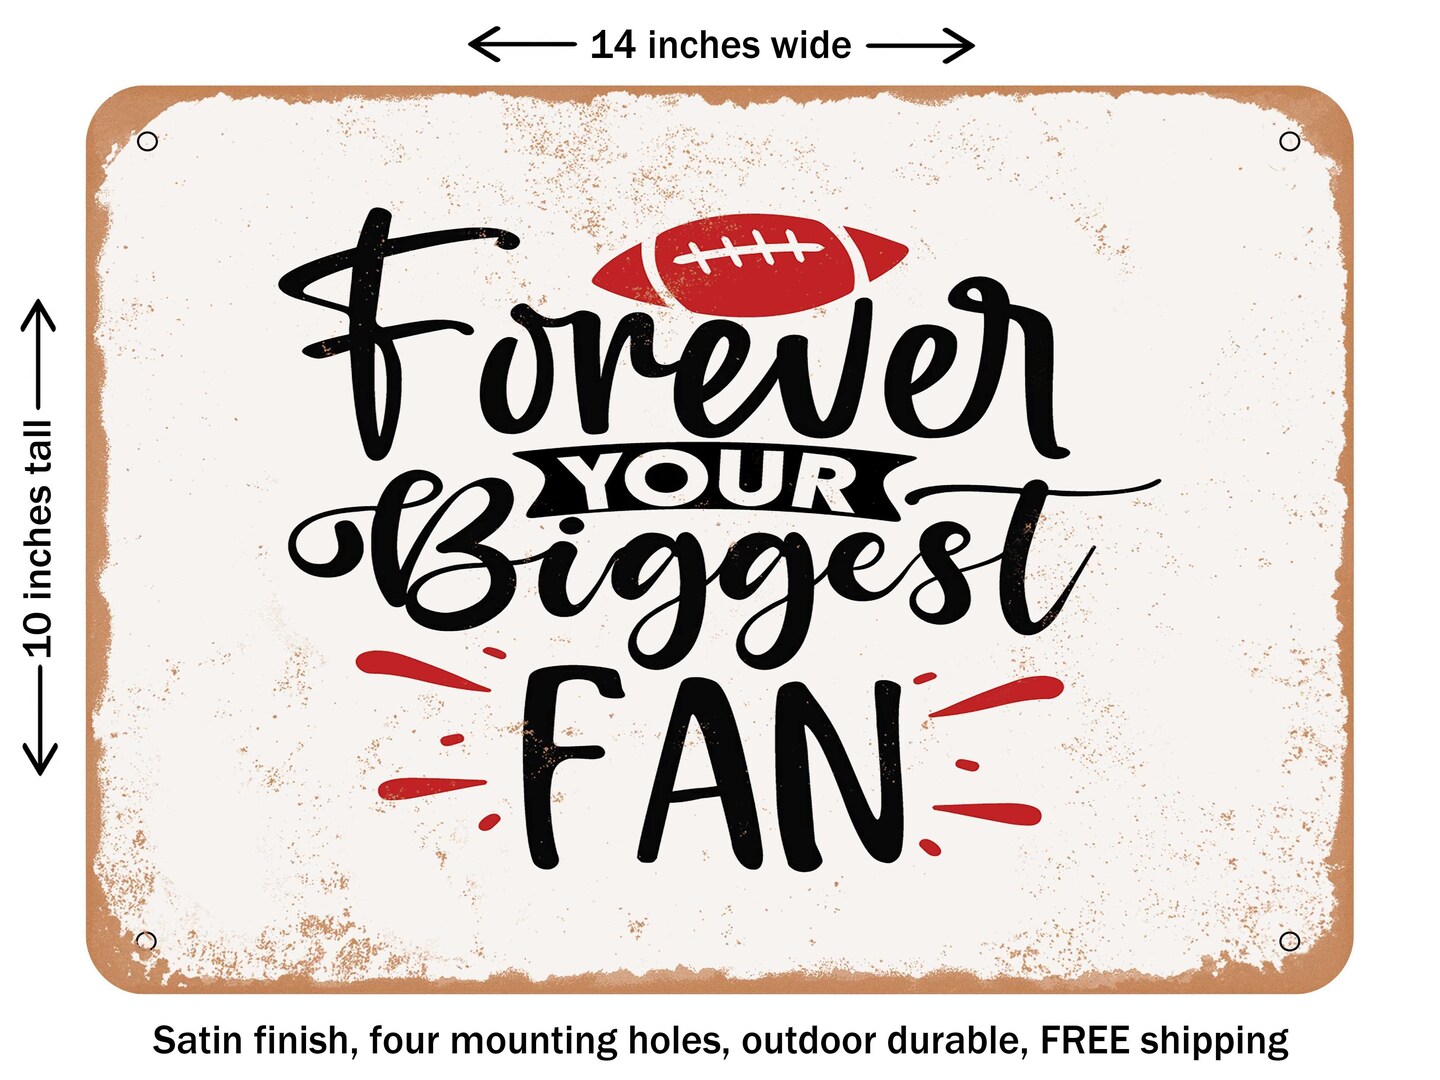 DECORATIVE METAL SIGN - Forever Your Biggest Fan - Vintage Rusty Look